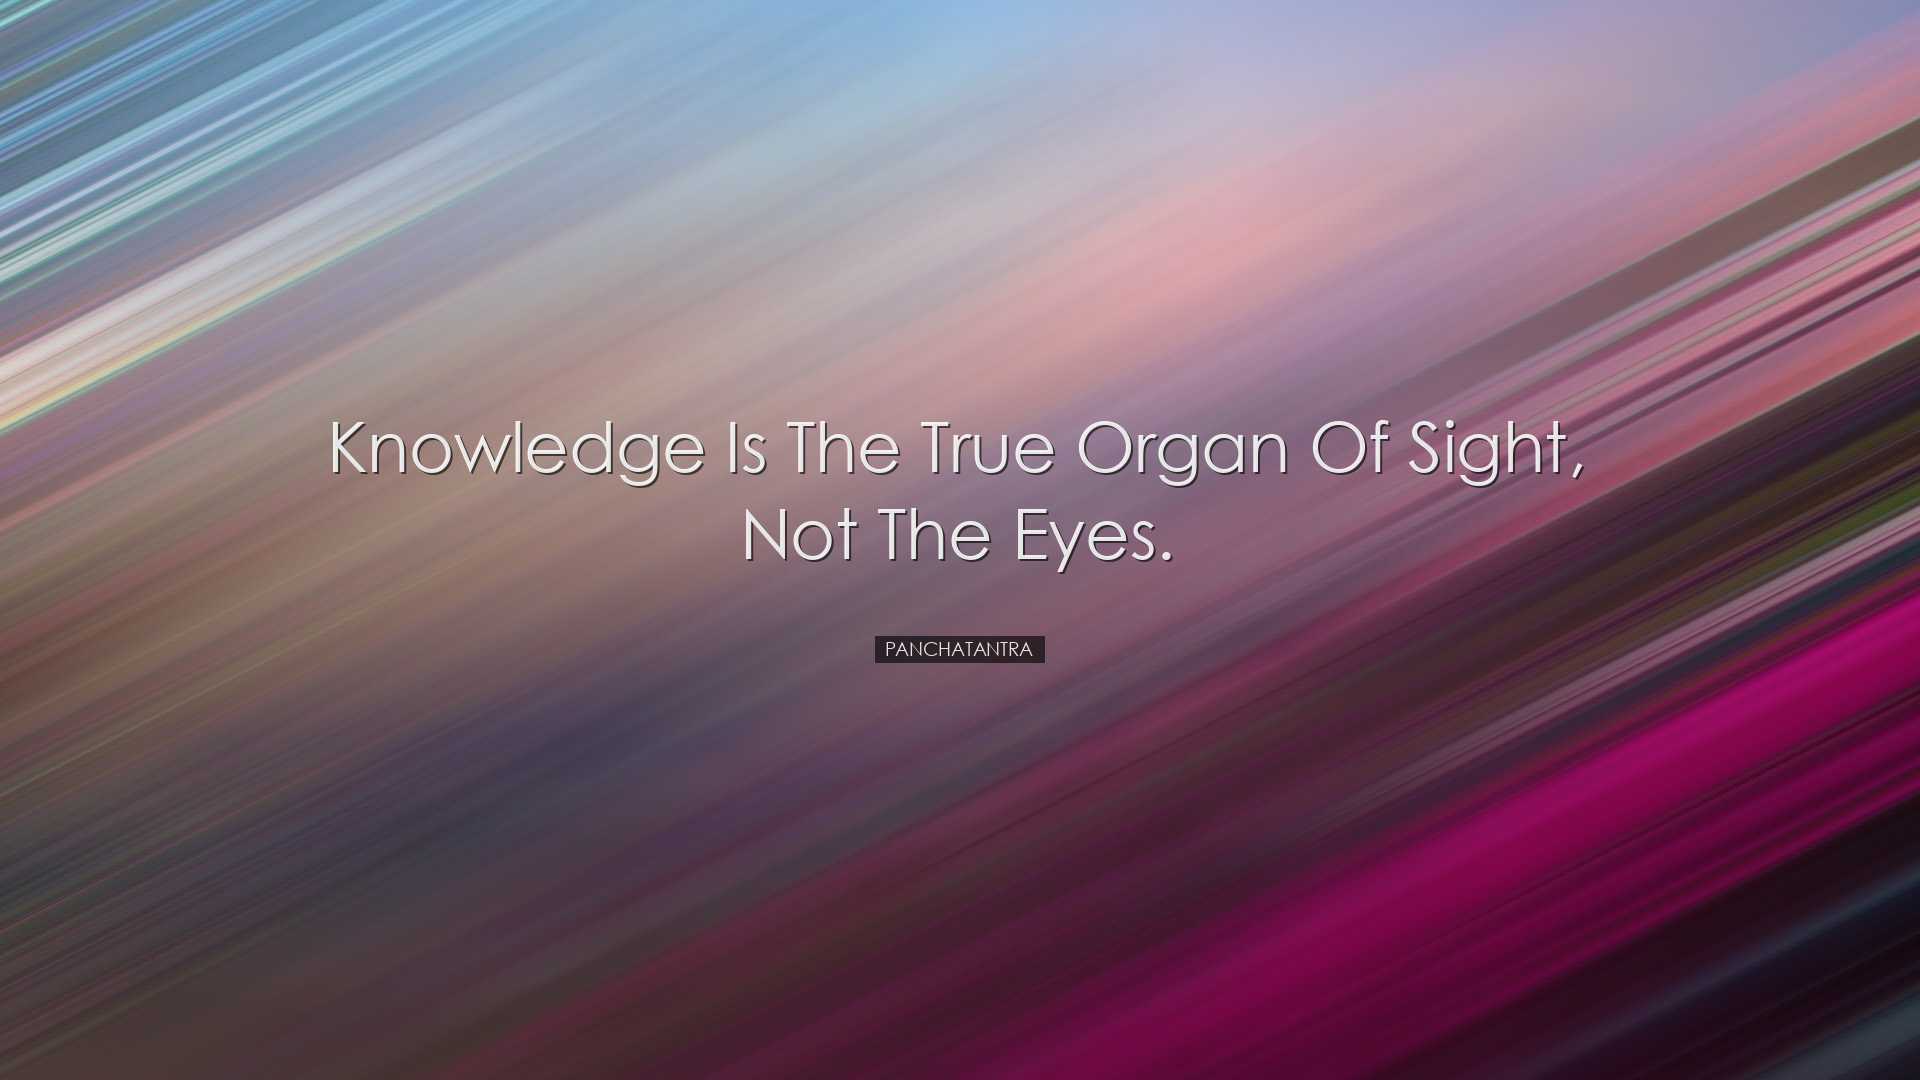 Knowledge is the true organ of sight, not the eyes. - Panchatantra